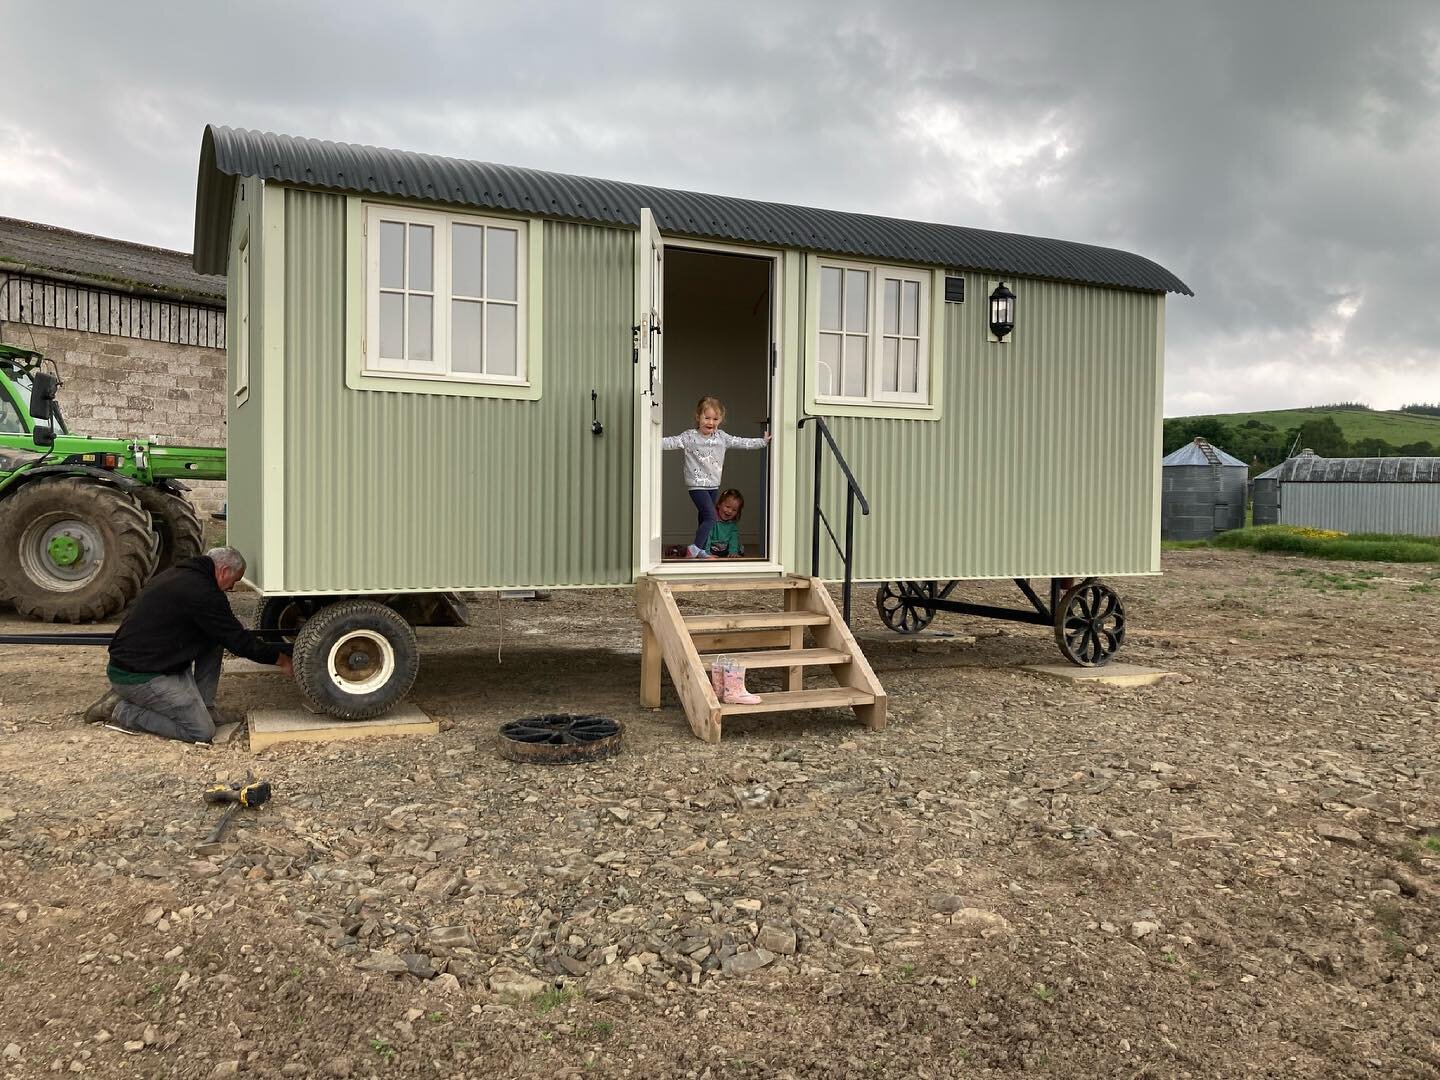 🌟 EXCITING DAY 🌟 
The shepherds hut is in situ!!! We are not taking bookings until it&rsquo;s ready but it&rsquo;s all systems go, 1 month until opening? Maybe? Watch this space&hellip;.